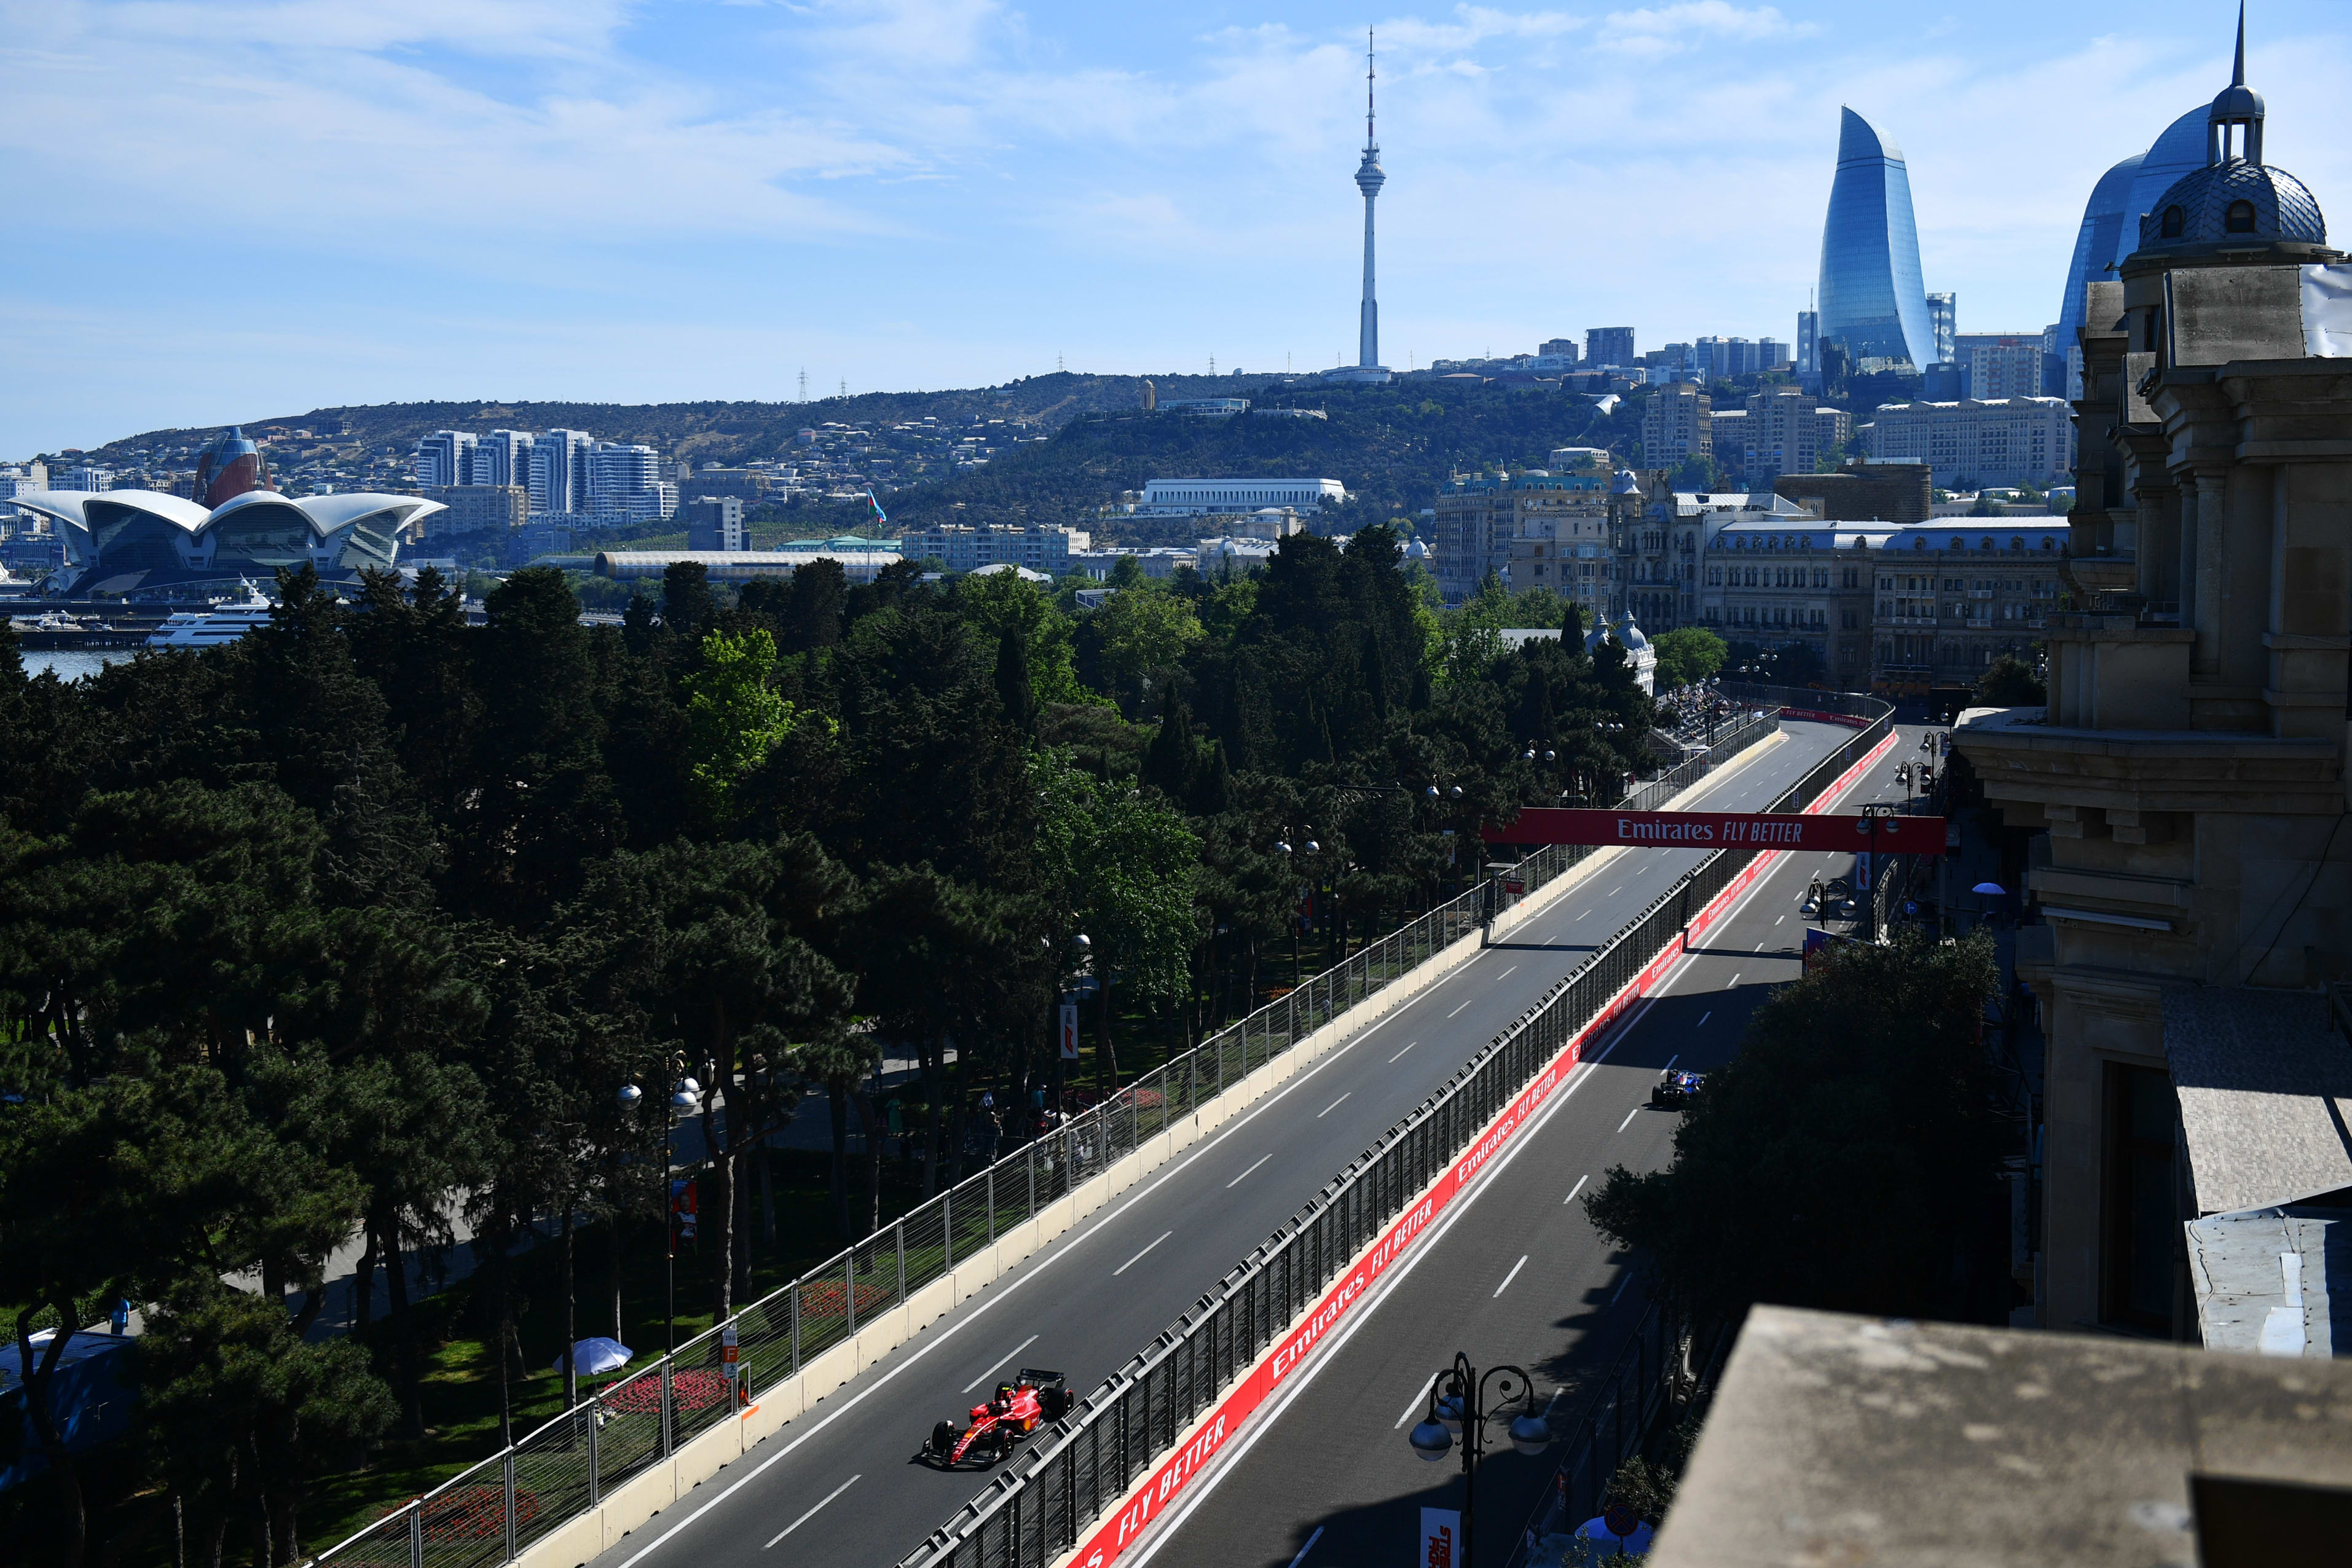 A Ferrari makes his way up the final straight to the start/ finish while a Williams passes by on the other side of the track